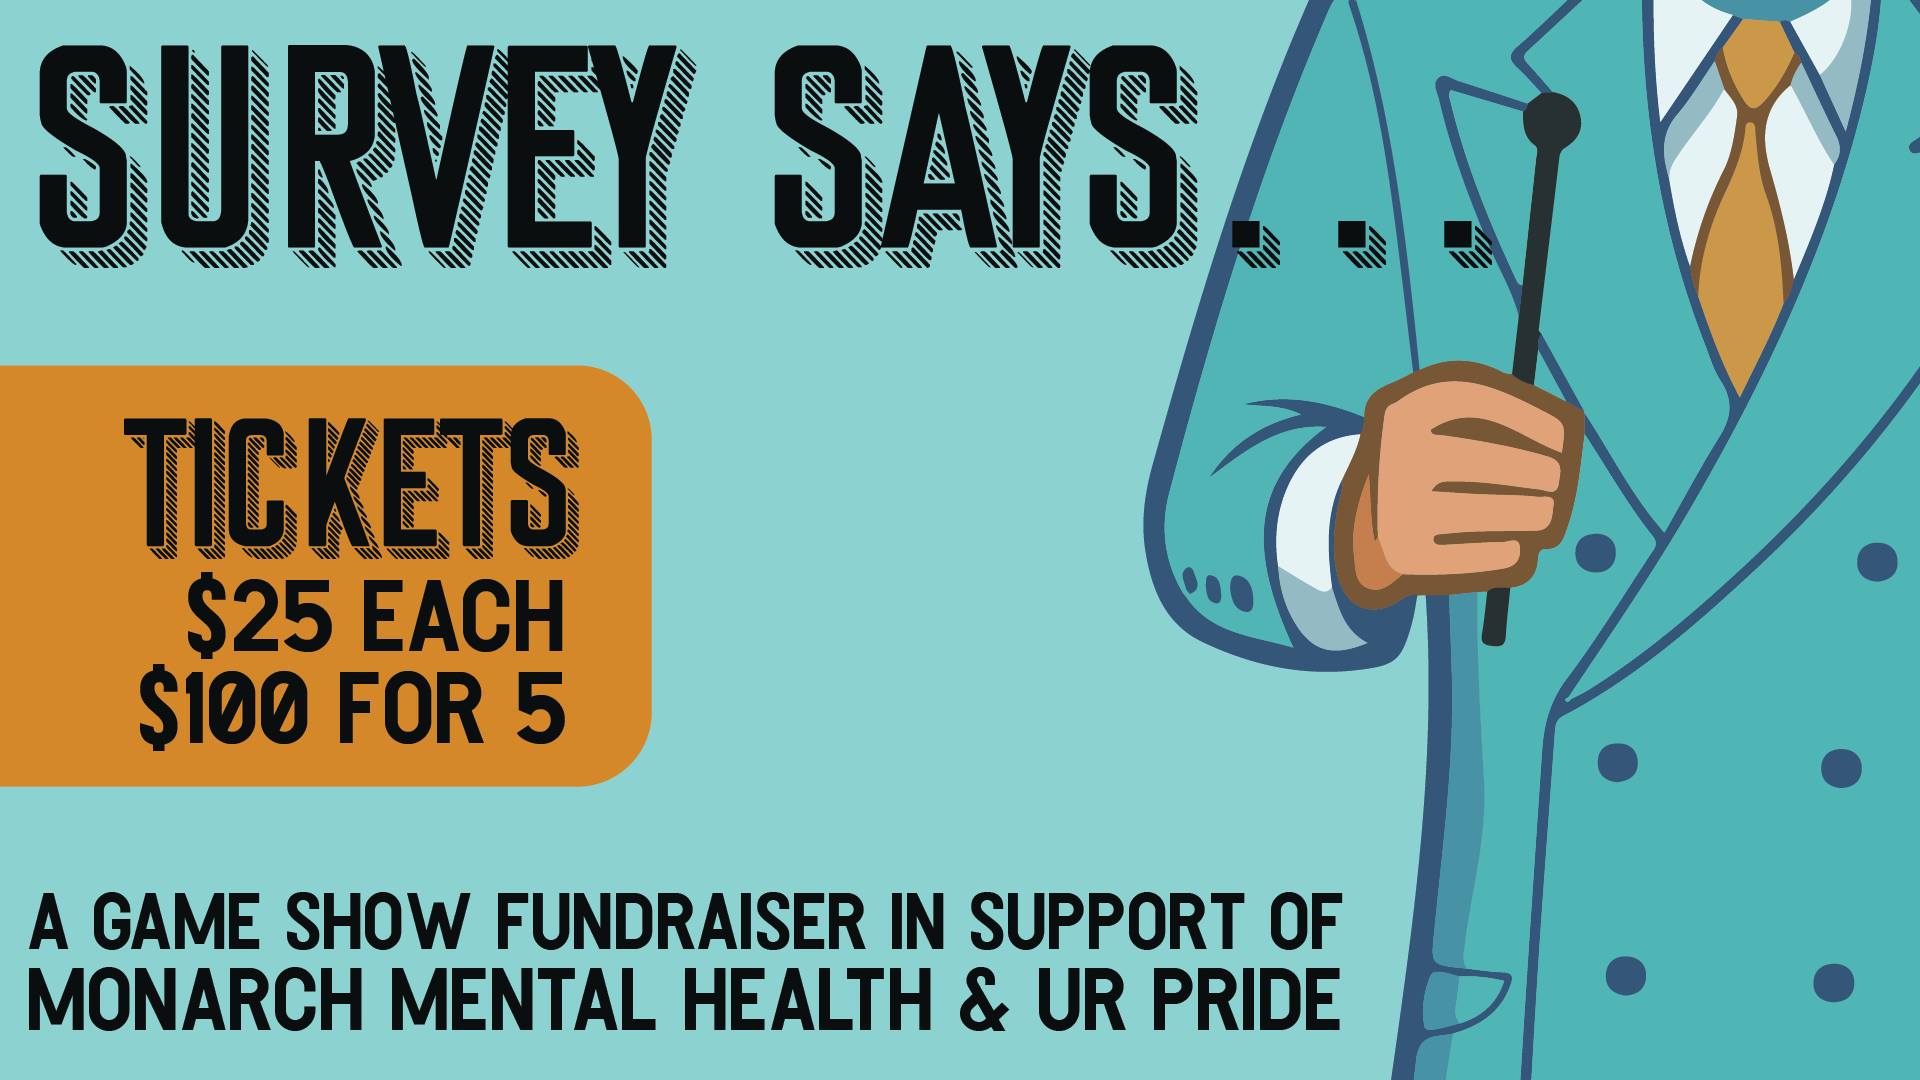 Survey Says: Game Show Fundraiser for Monarch Mental Health